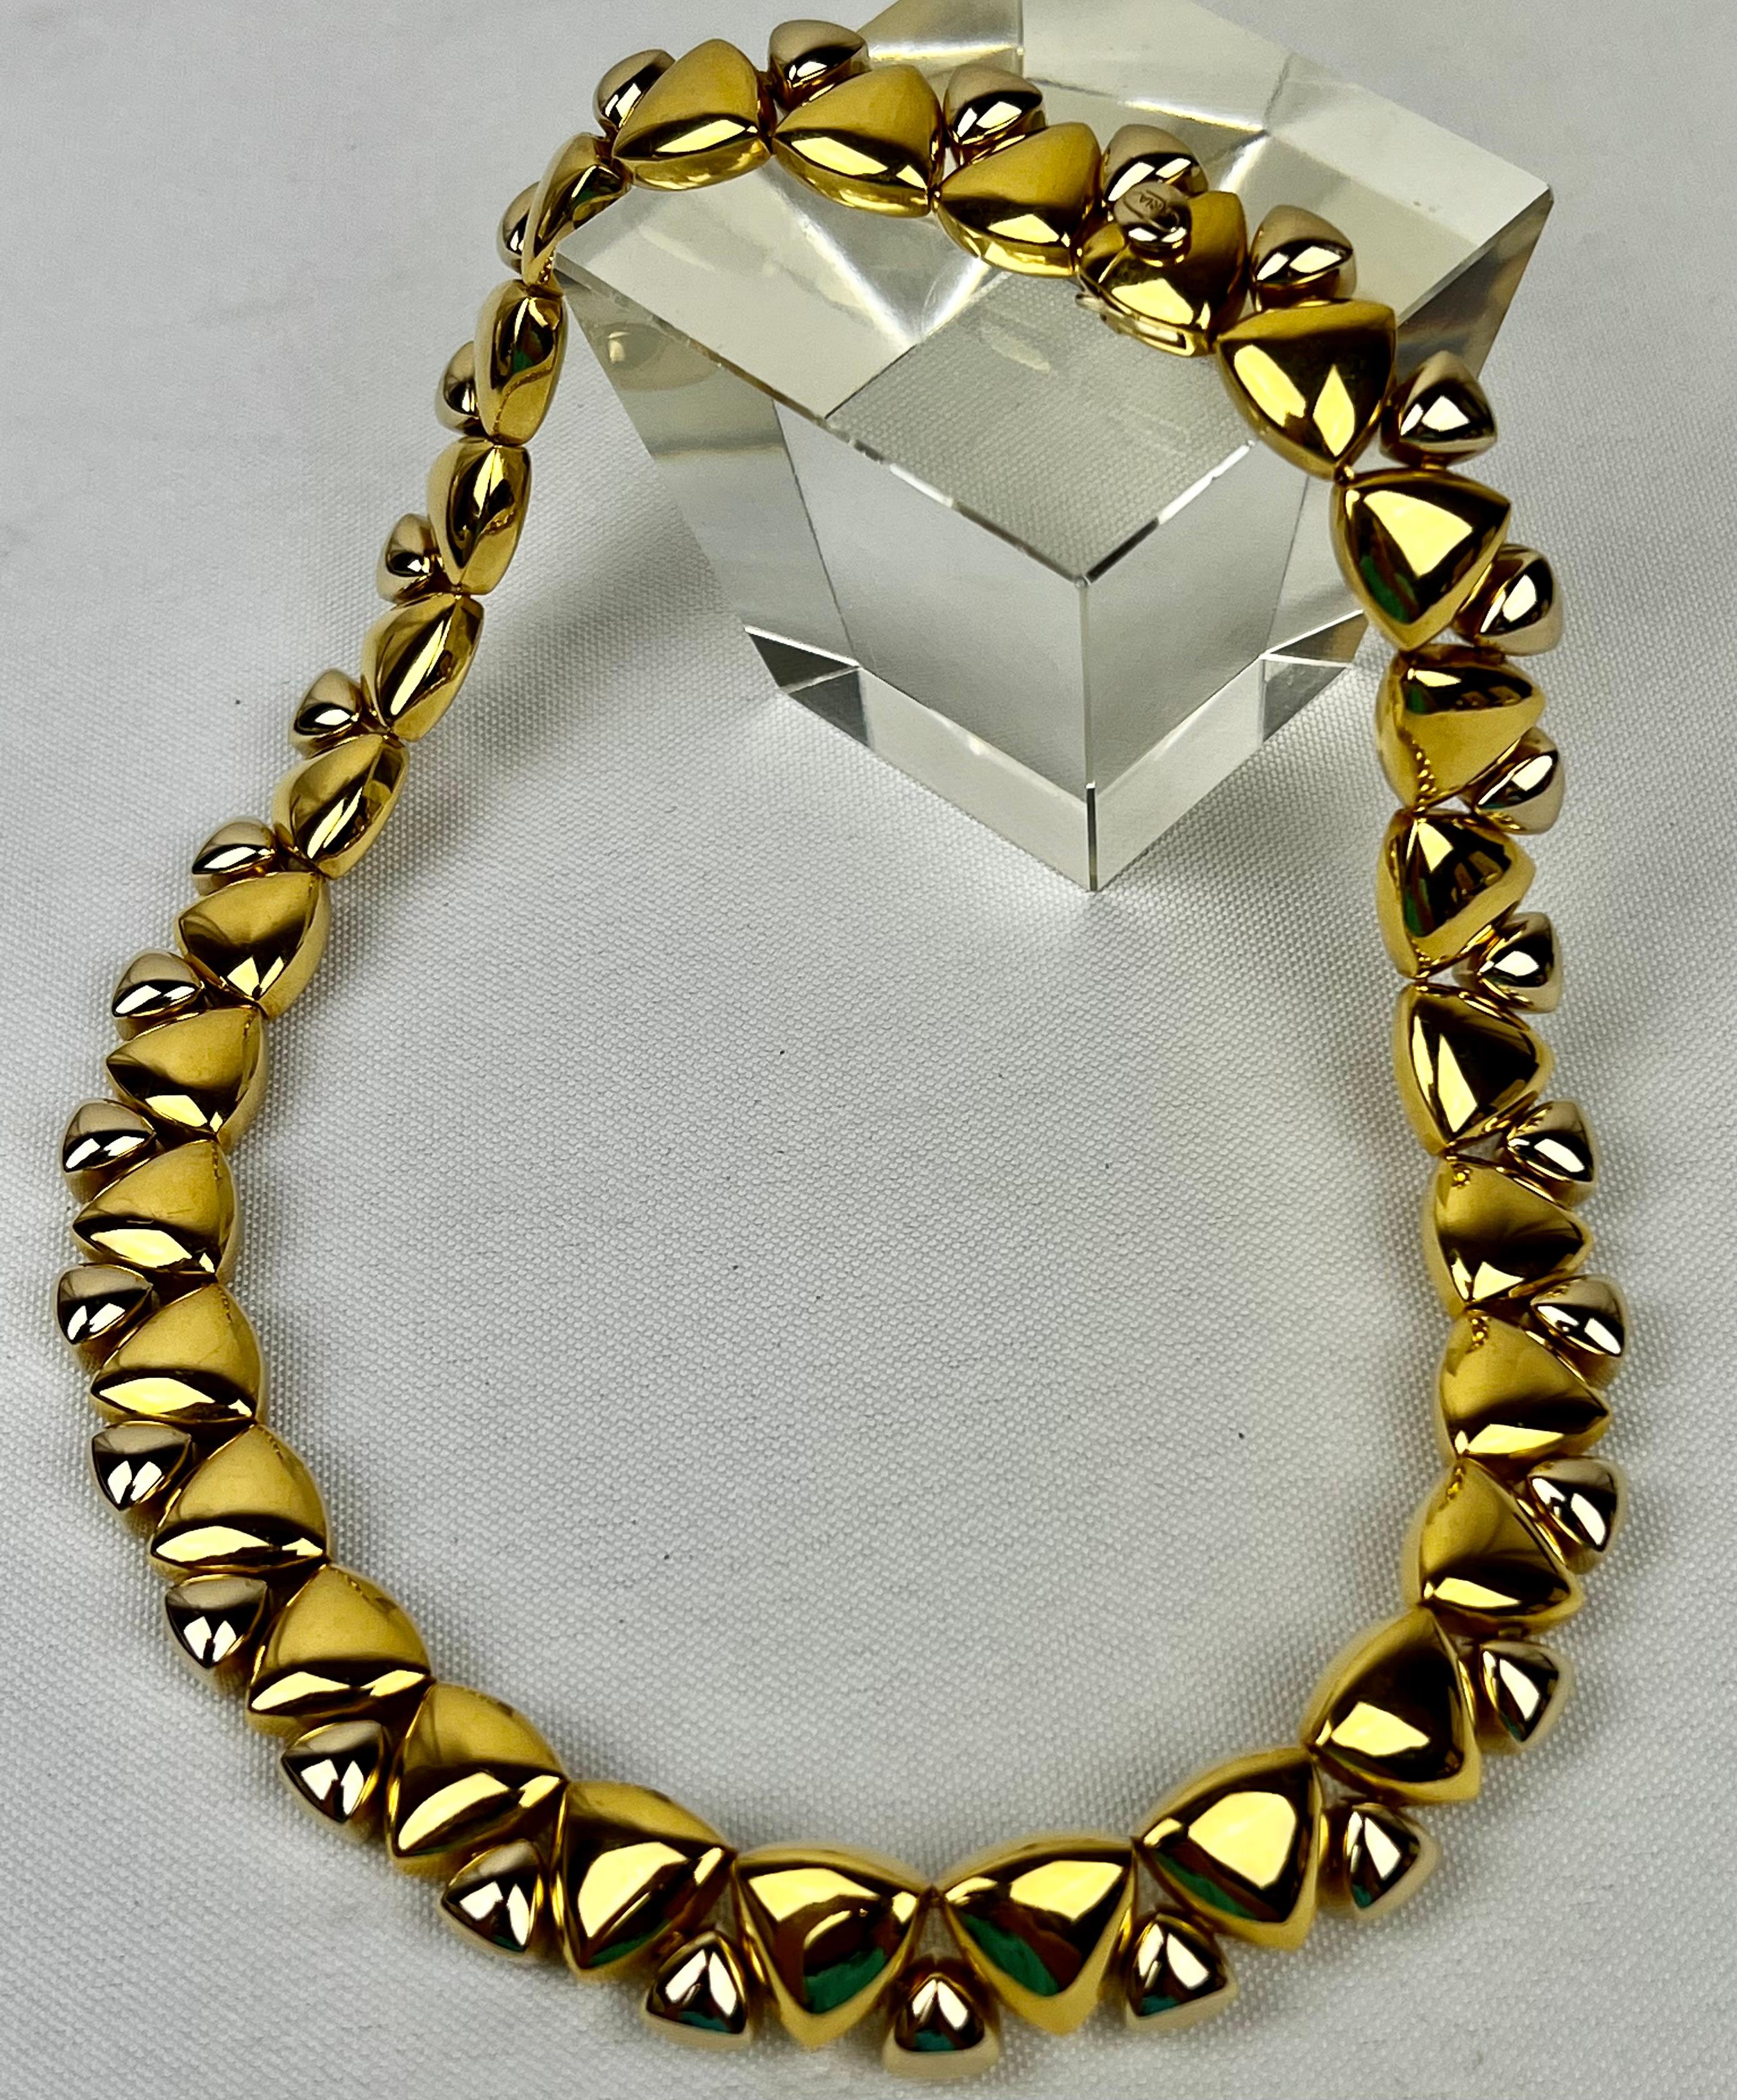 The eighteen karat two tone gold necklace is by Kria.   The necklace consists of 29 identical links with a 5